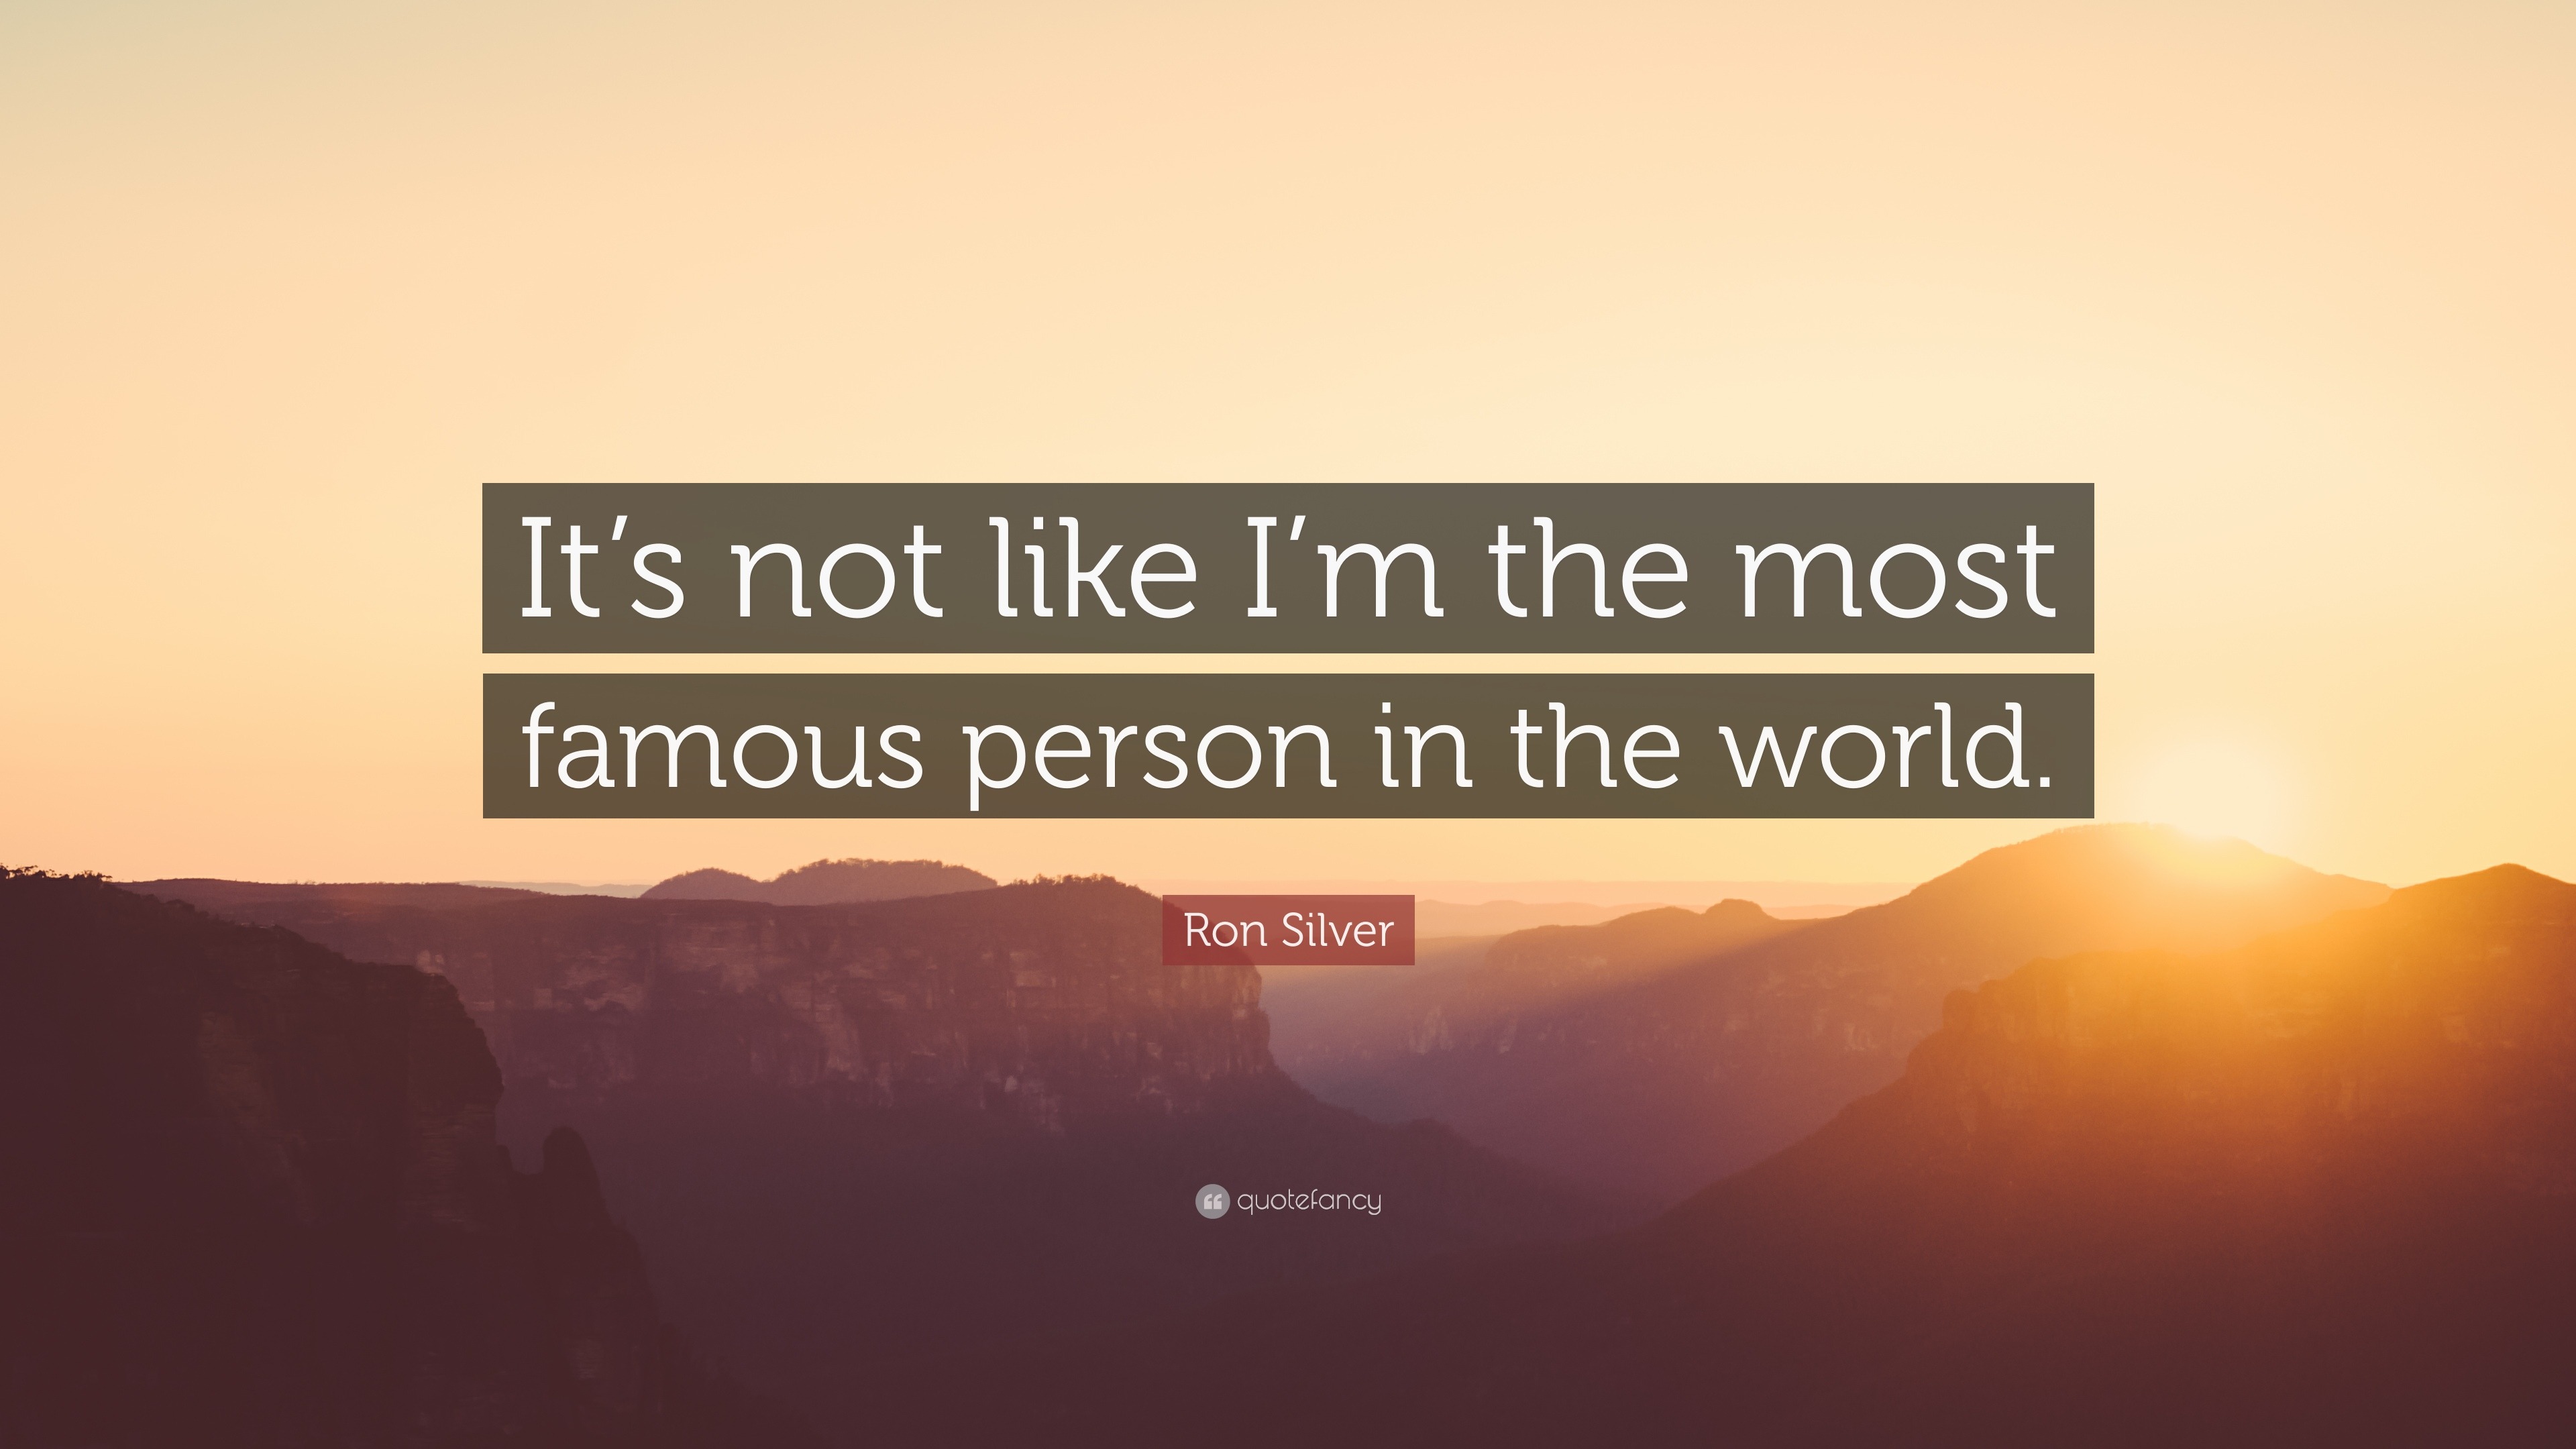 Ron Silver quote: It's not like I'm the most famous person in the